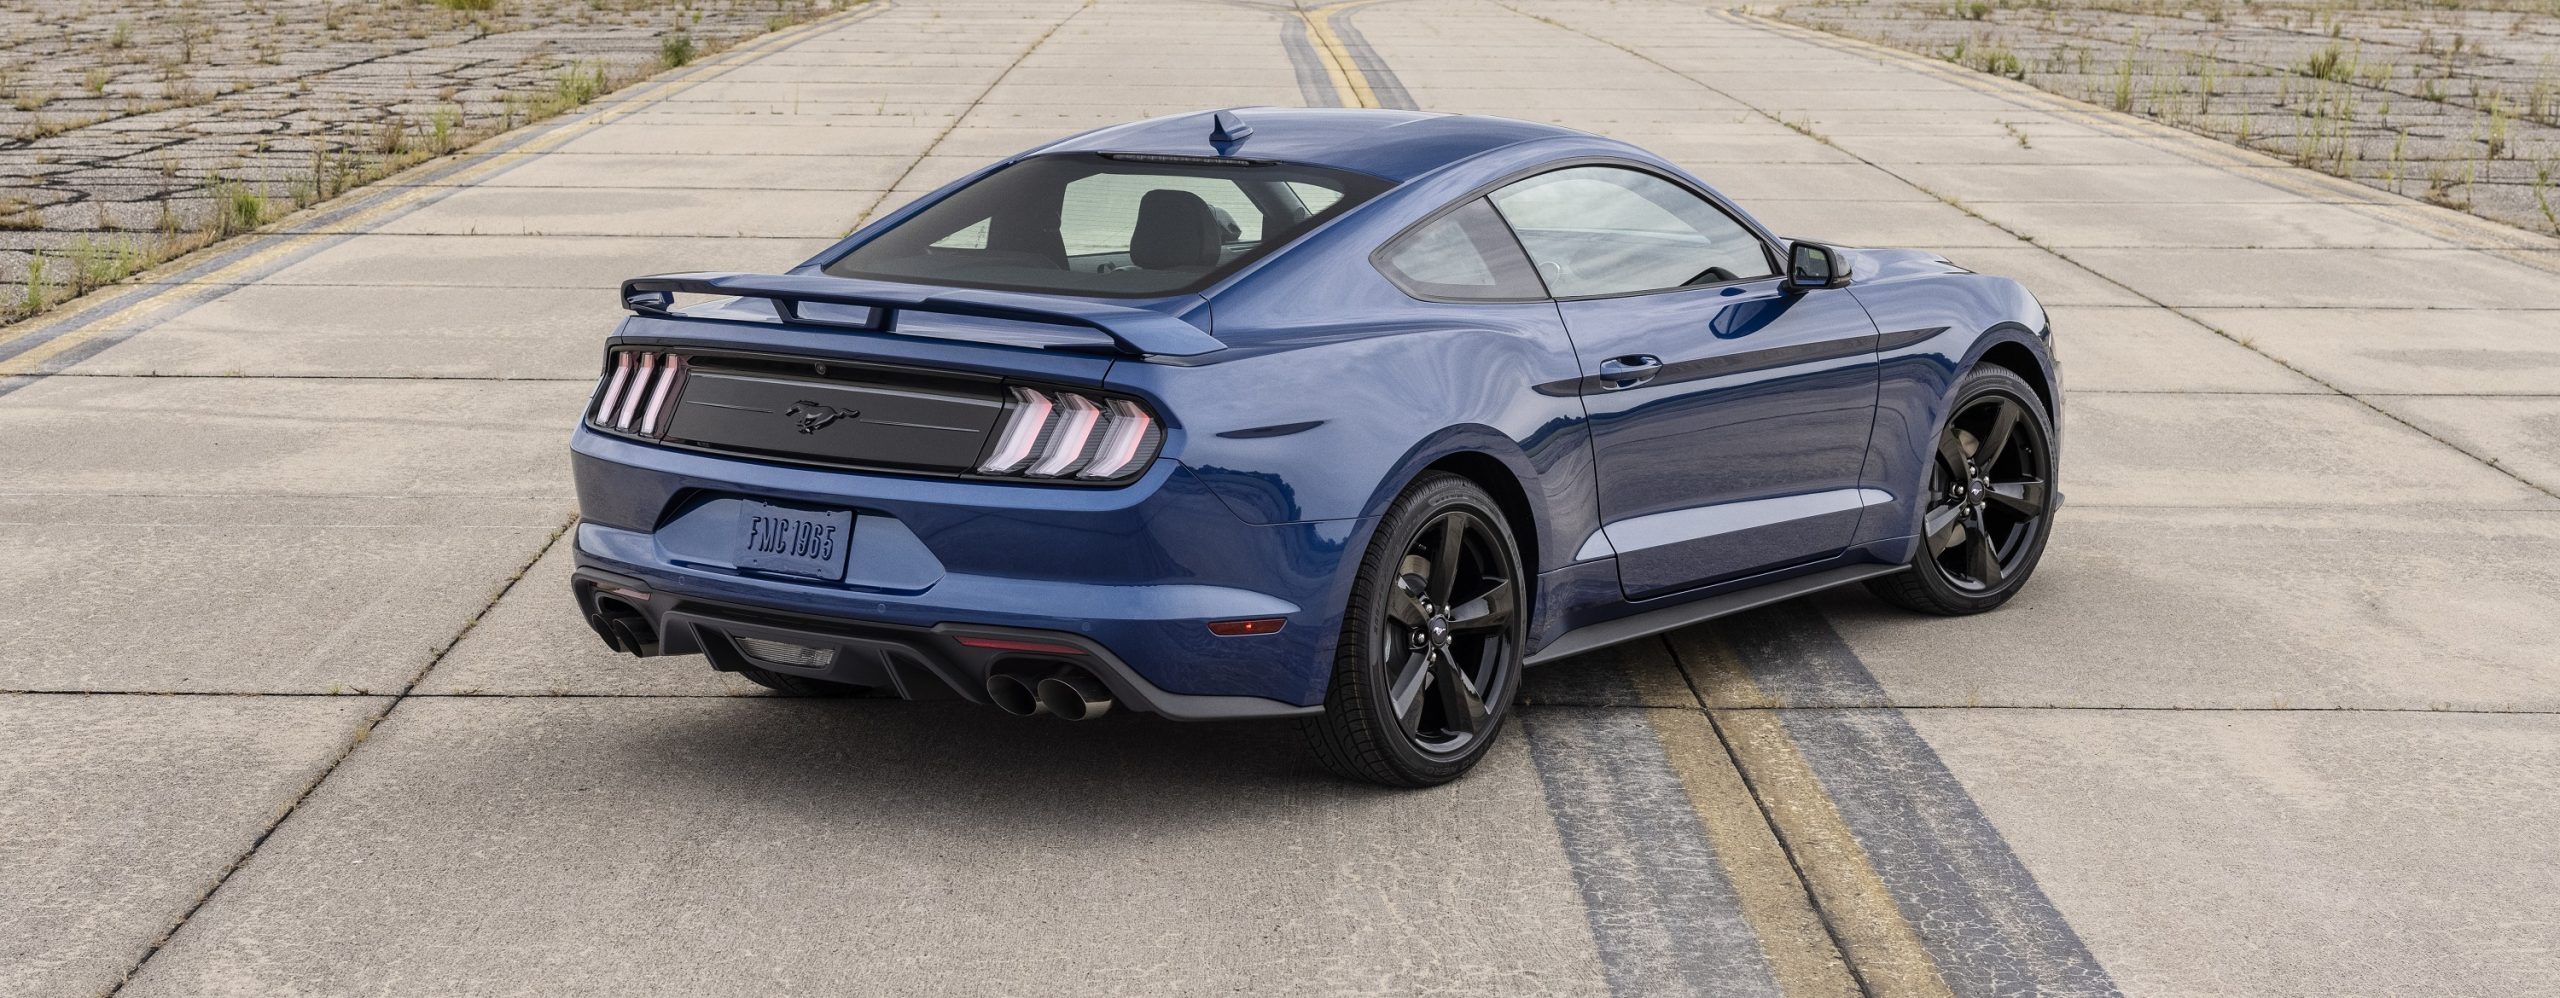 The rear of the 2021 Ford Mustang Stealth Edition, shot from the rear 3/4